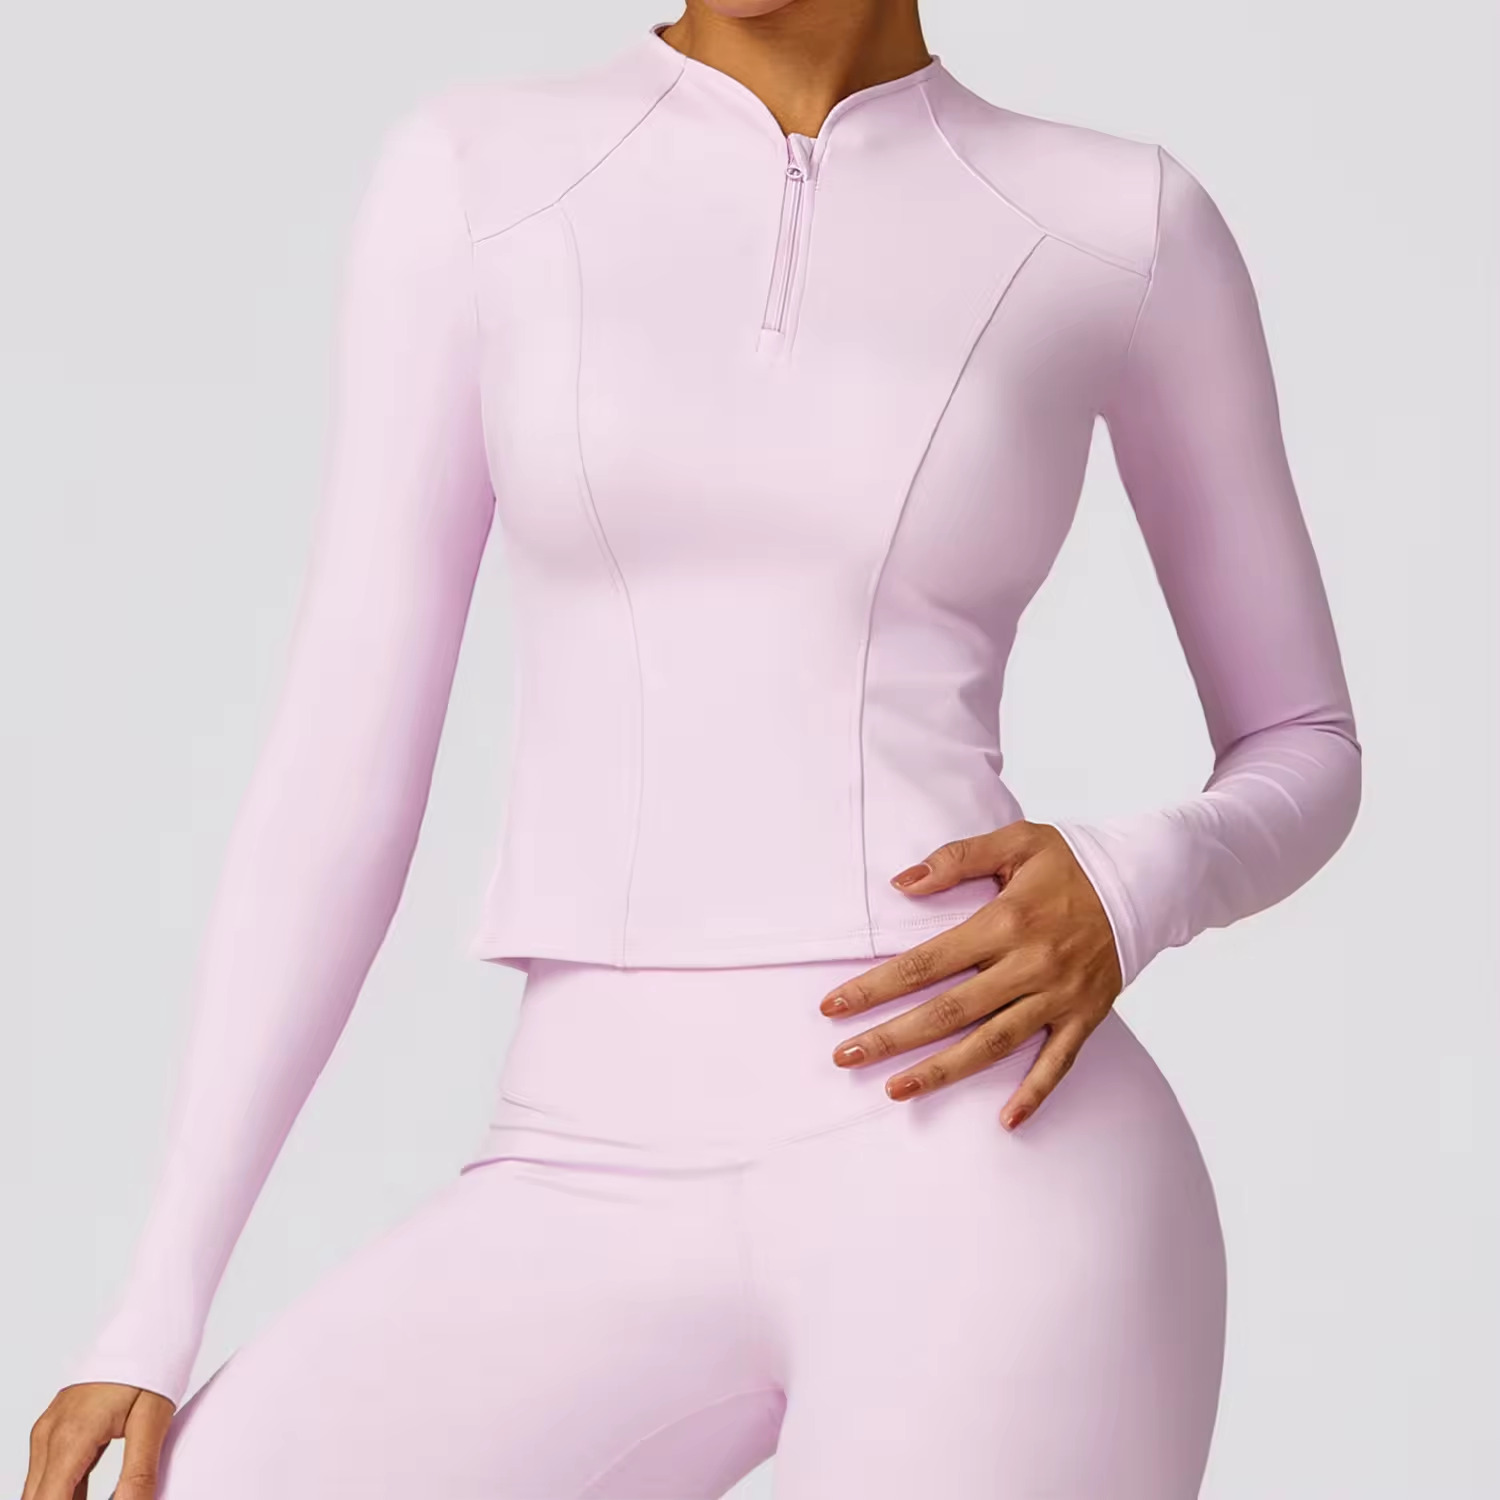 Half-zip Quick-drying Breathable High-support Fitness Top